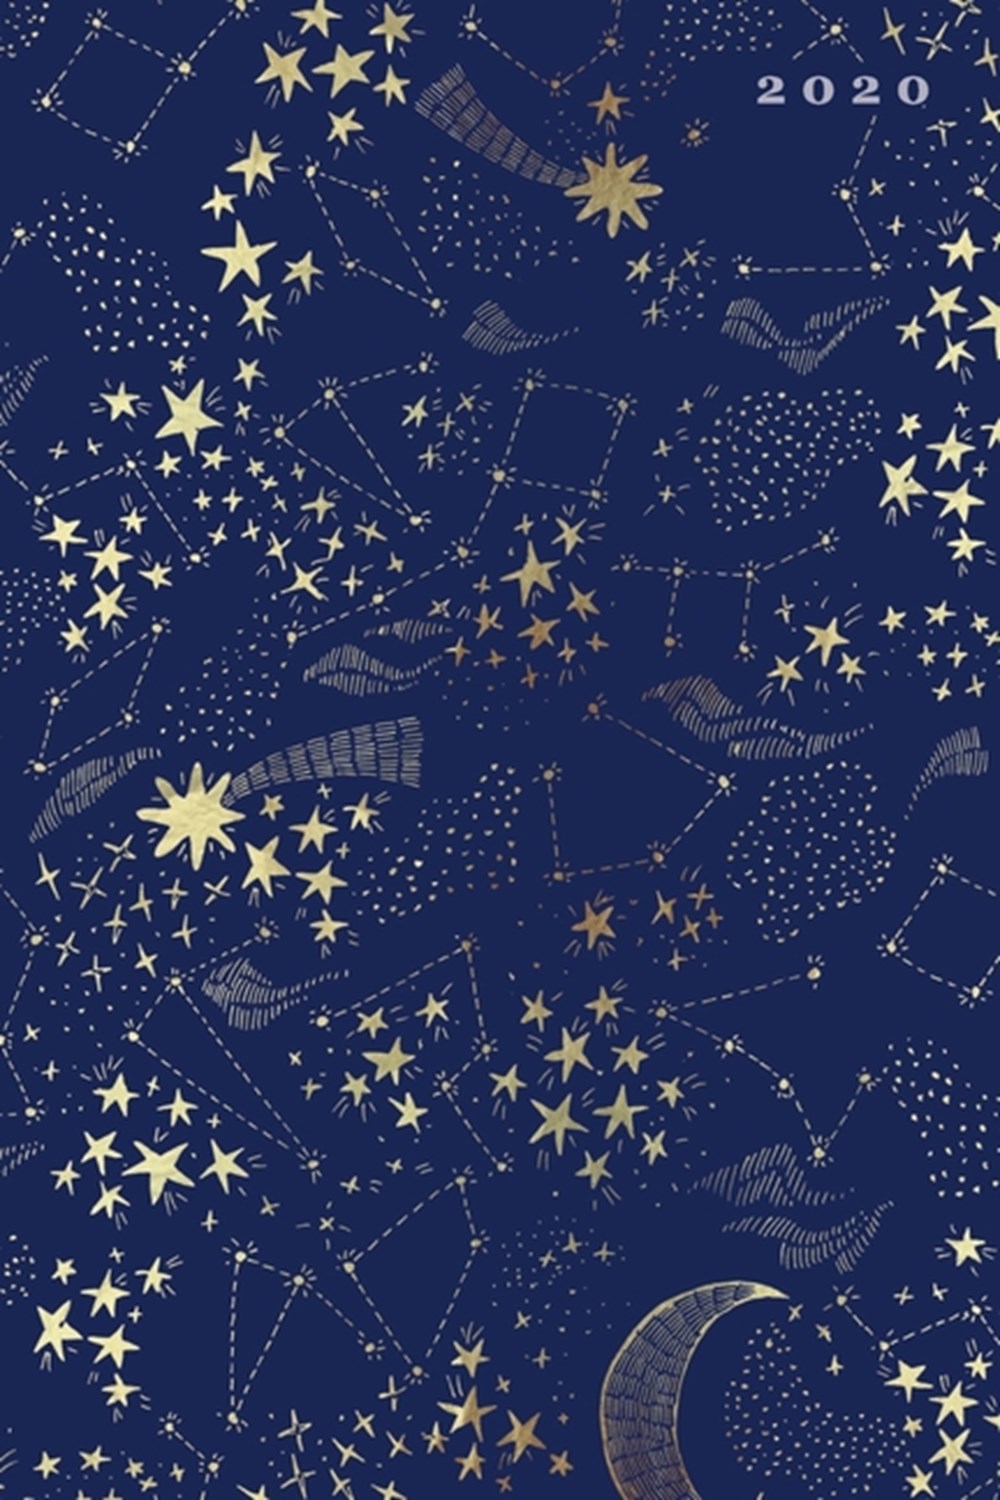 2020: Weekly + Monthly View - Moon, Constellation + Galaxy in Gold - 6x9 in - 2020 Calendar Organize